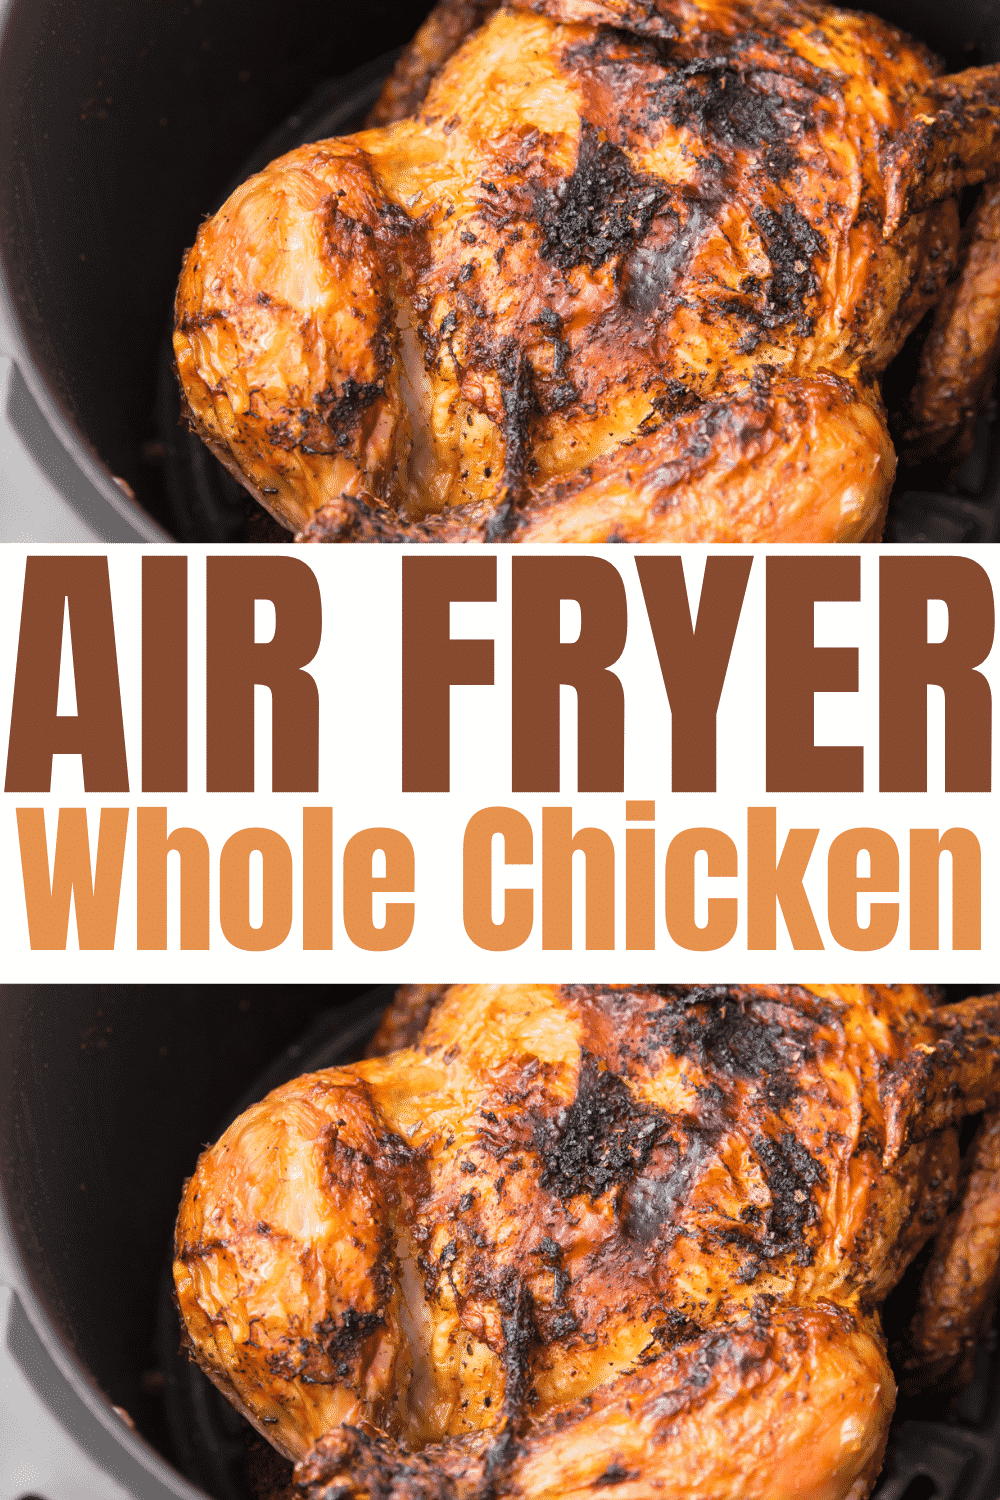 This Air Fryer Whole Chicken recipe makes the most succulent roasted chicken in less than an hour! Skip the rotisserie chicken and make this at home with a few simple spices. #airfryerwholechicken #airfryerchicken via @vegetarianmamma